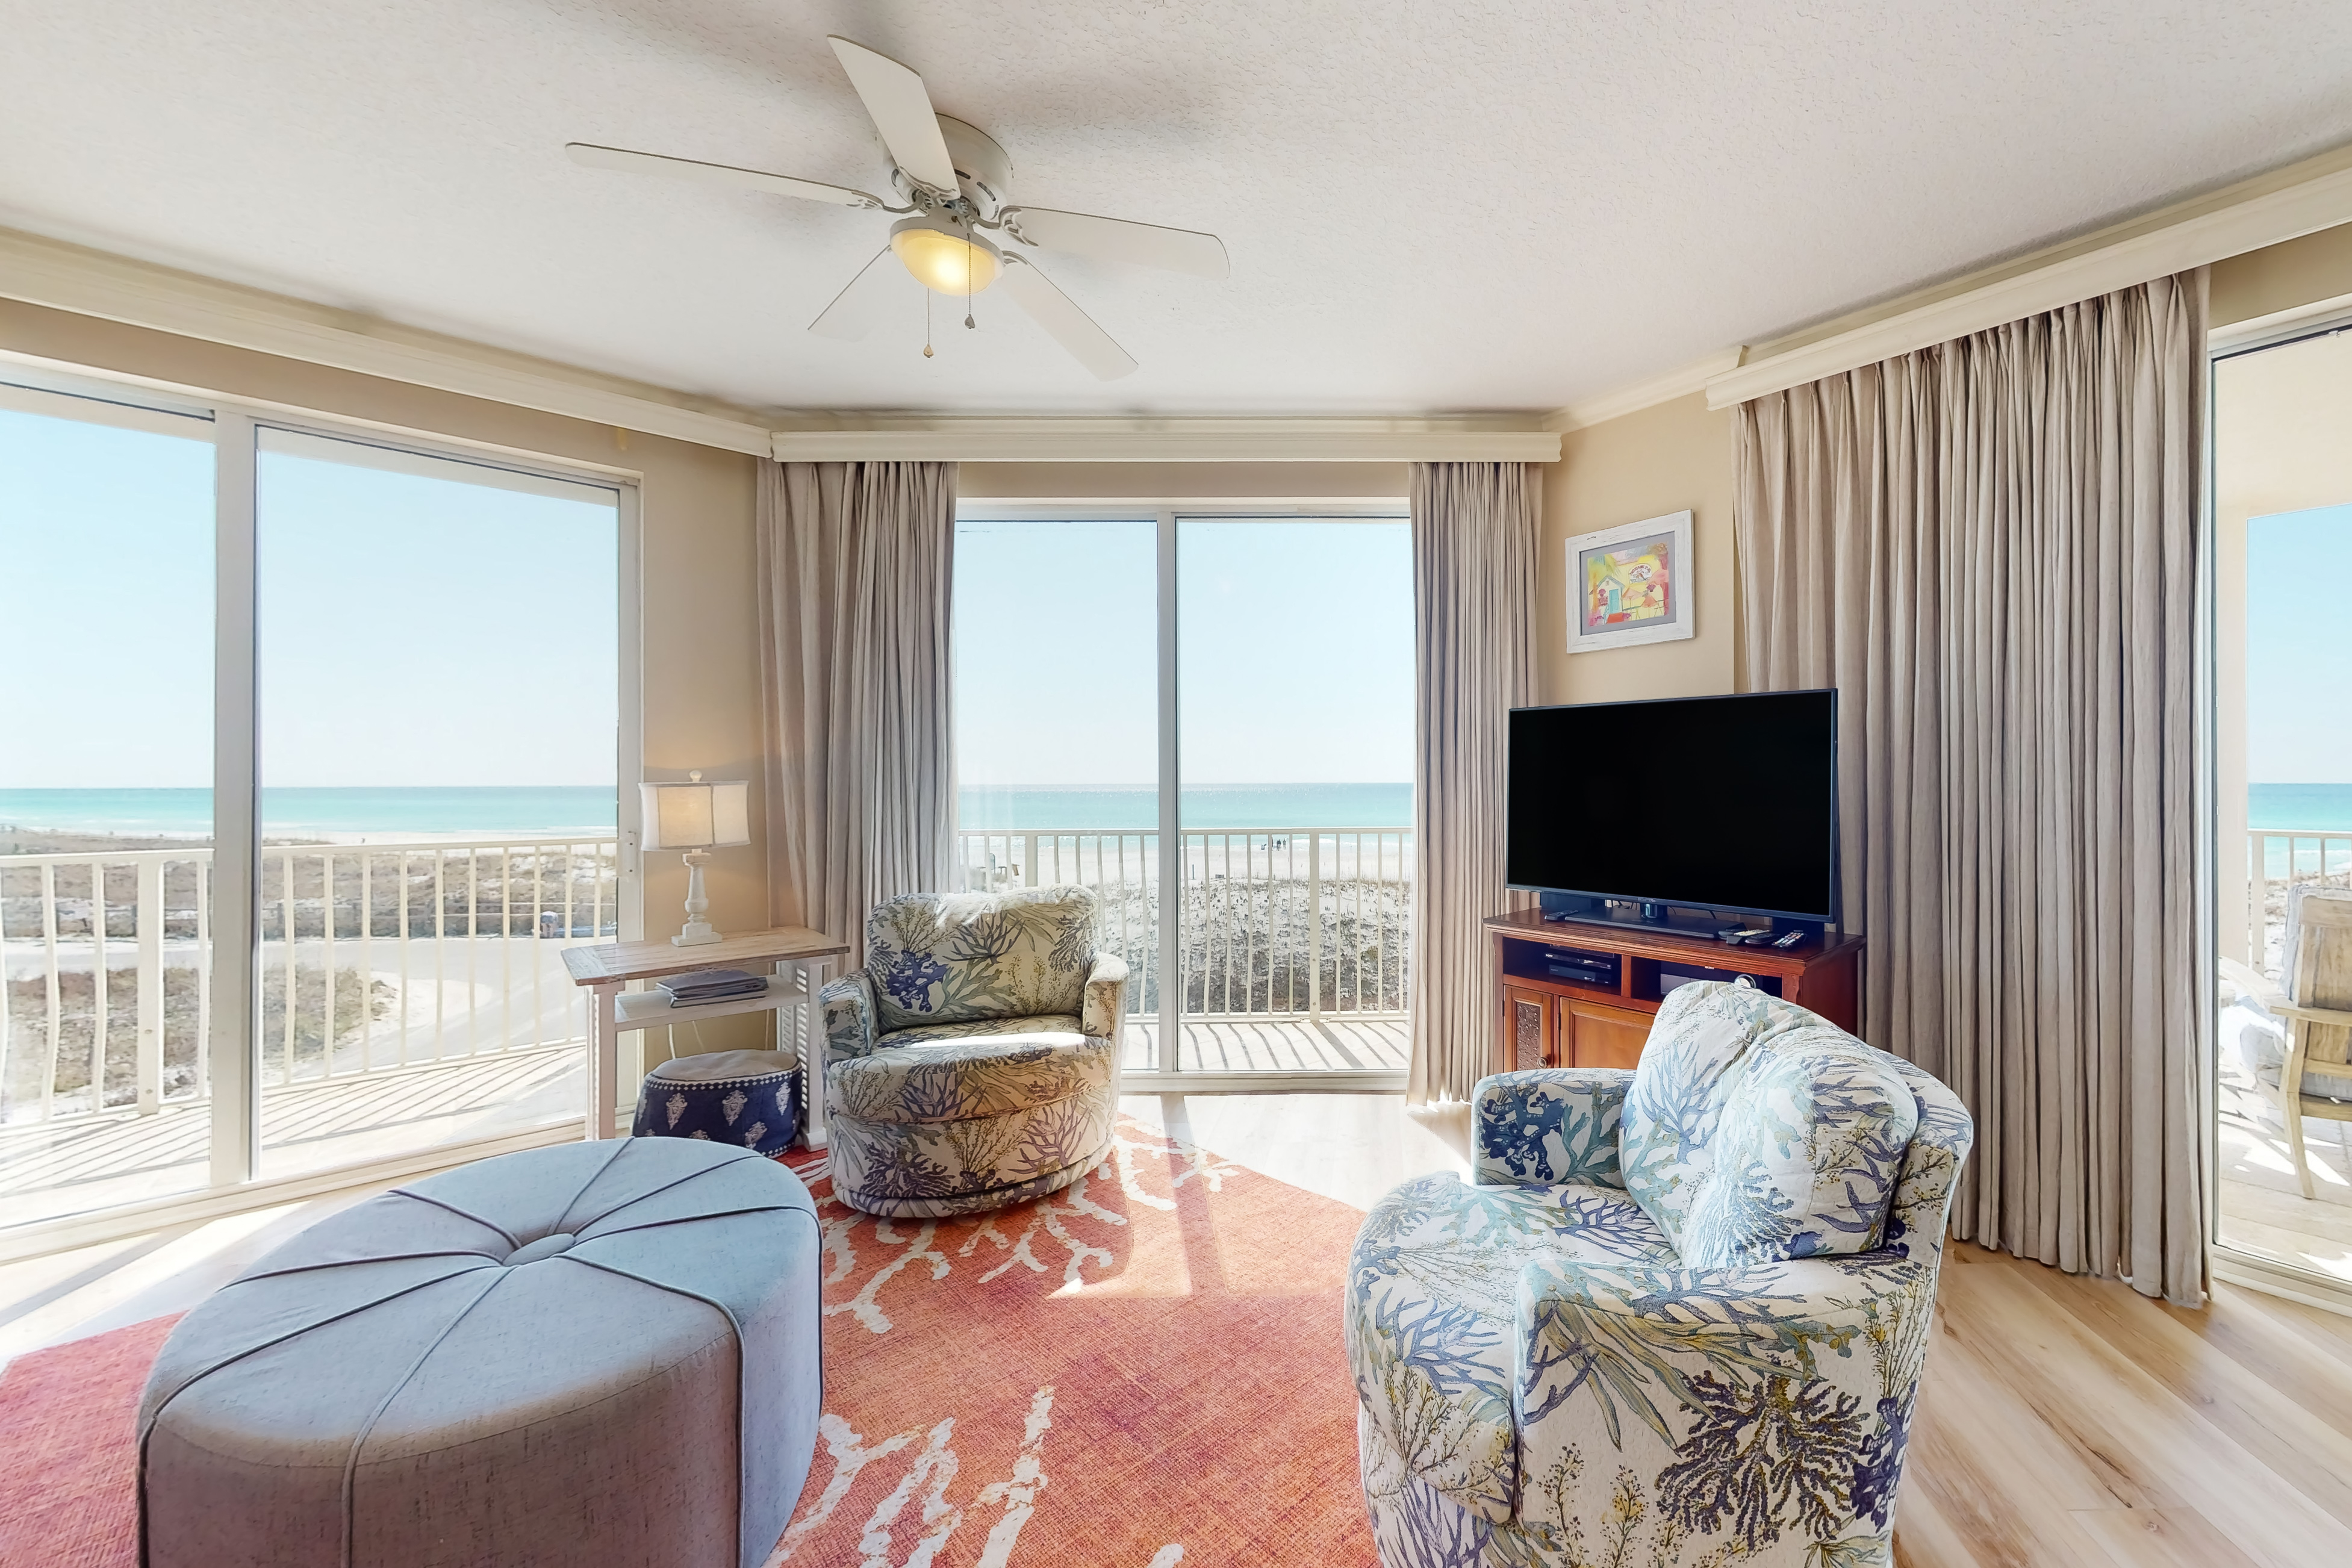 Dunes of Seagrove A209 Condo rental in Dunes of Seagrove in Highway 30-A Florida - #4